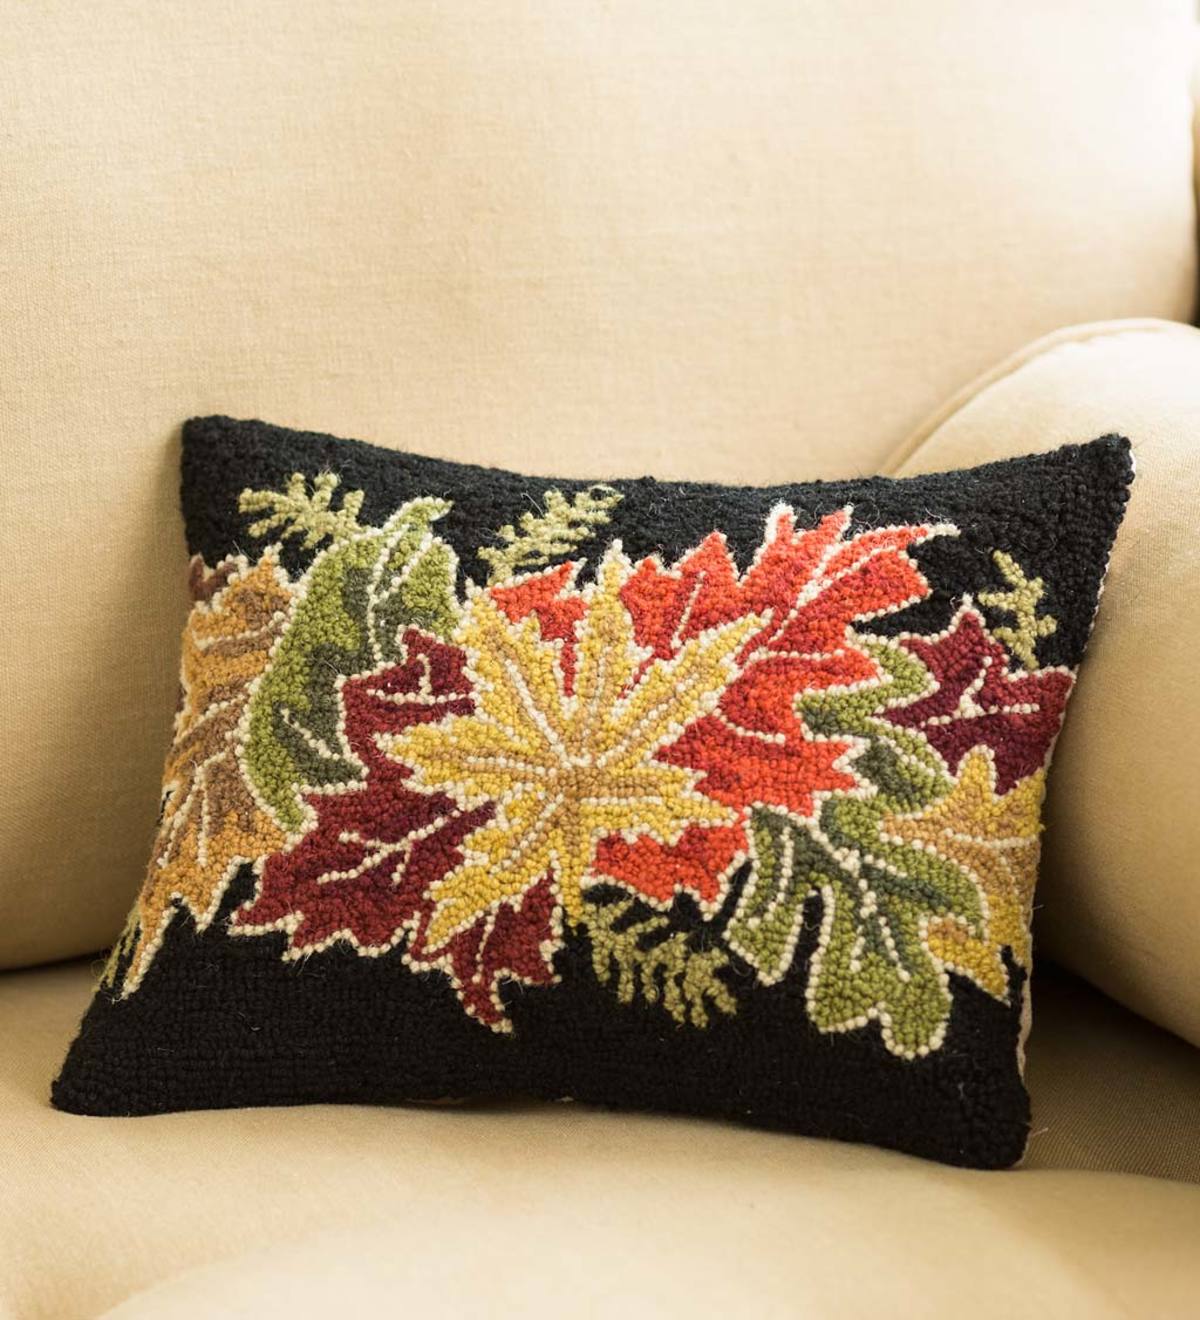 Hand-Hooked Wool Fall Leaves Pillow